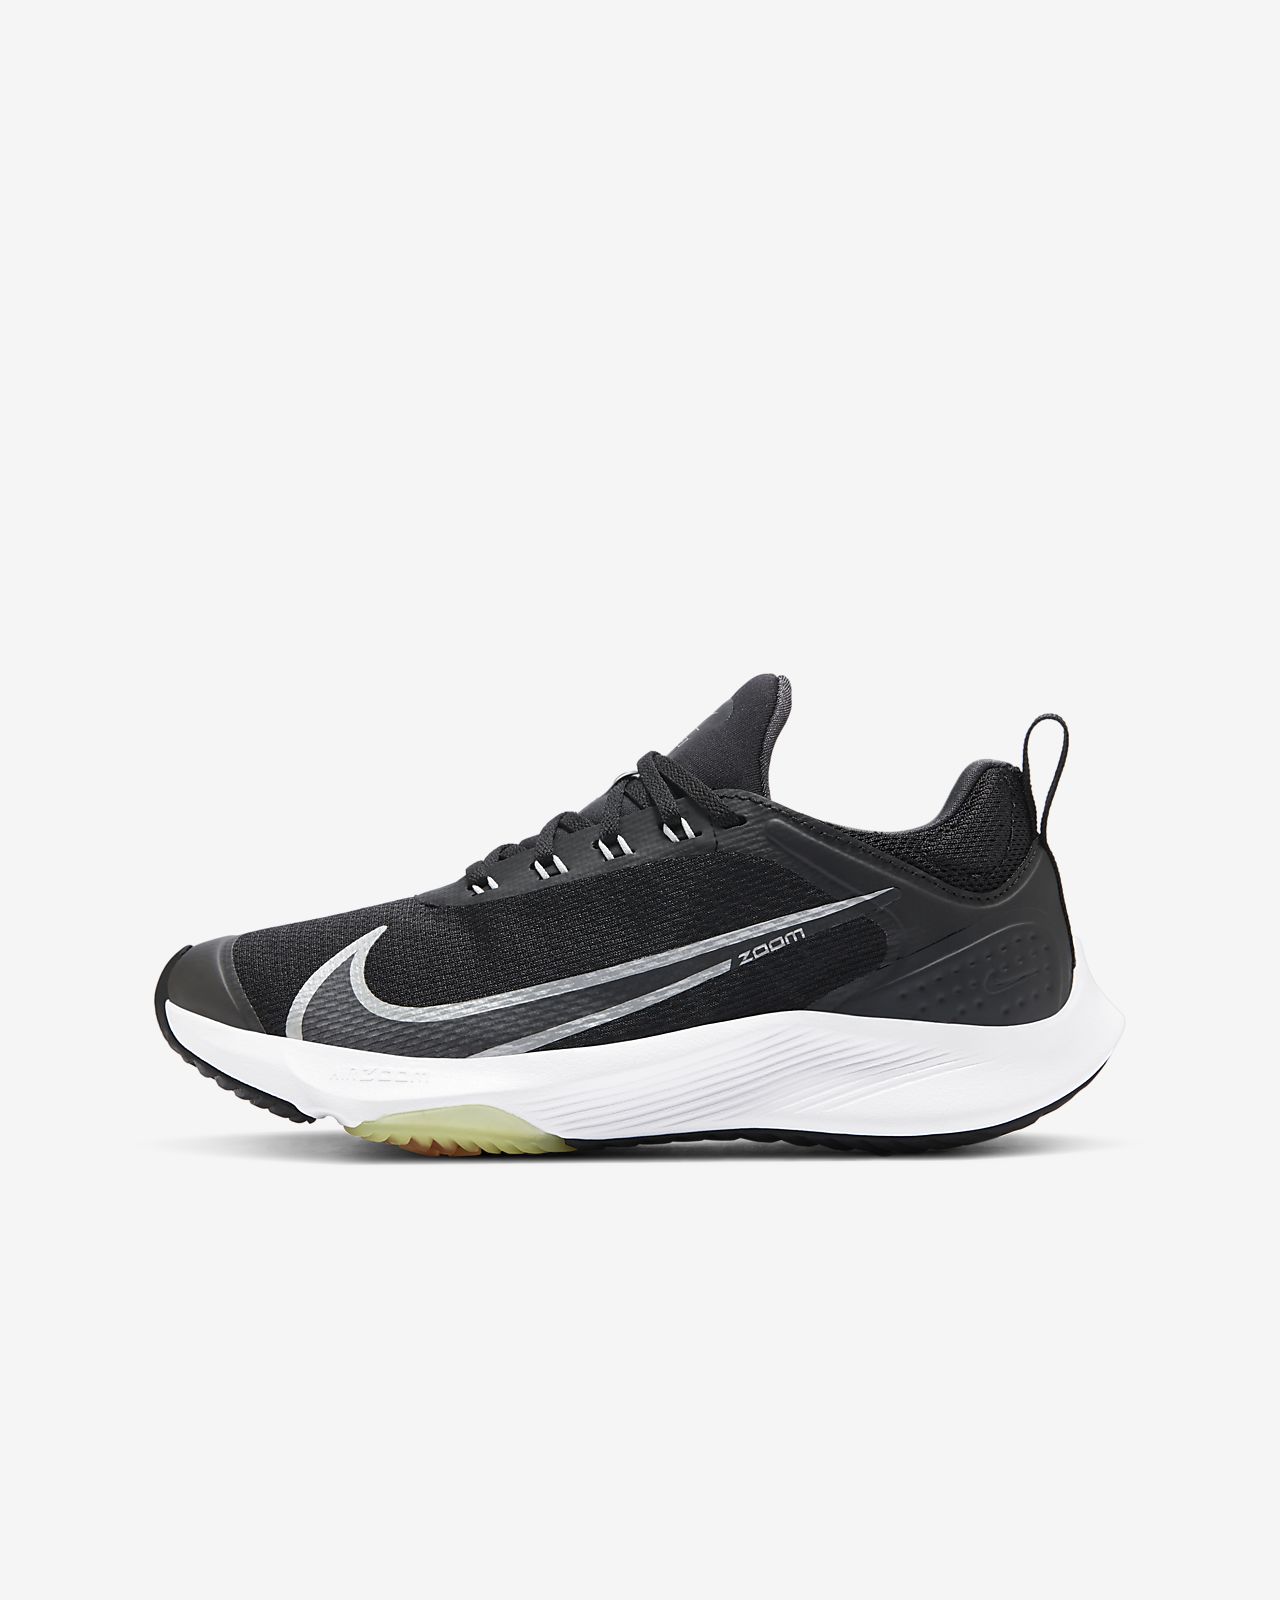 nike zoom shoes mens running old